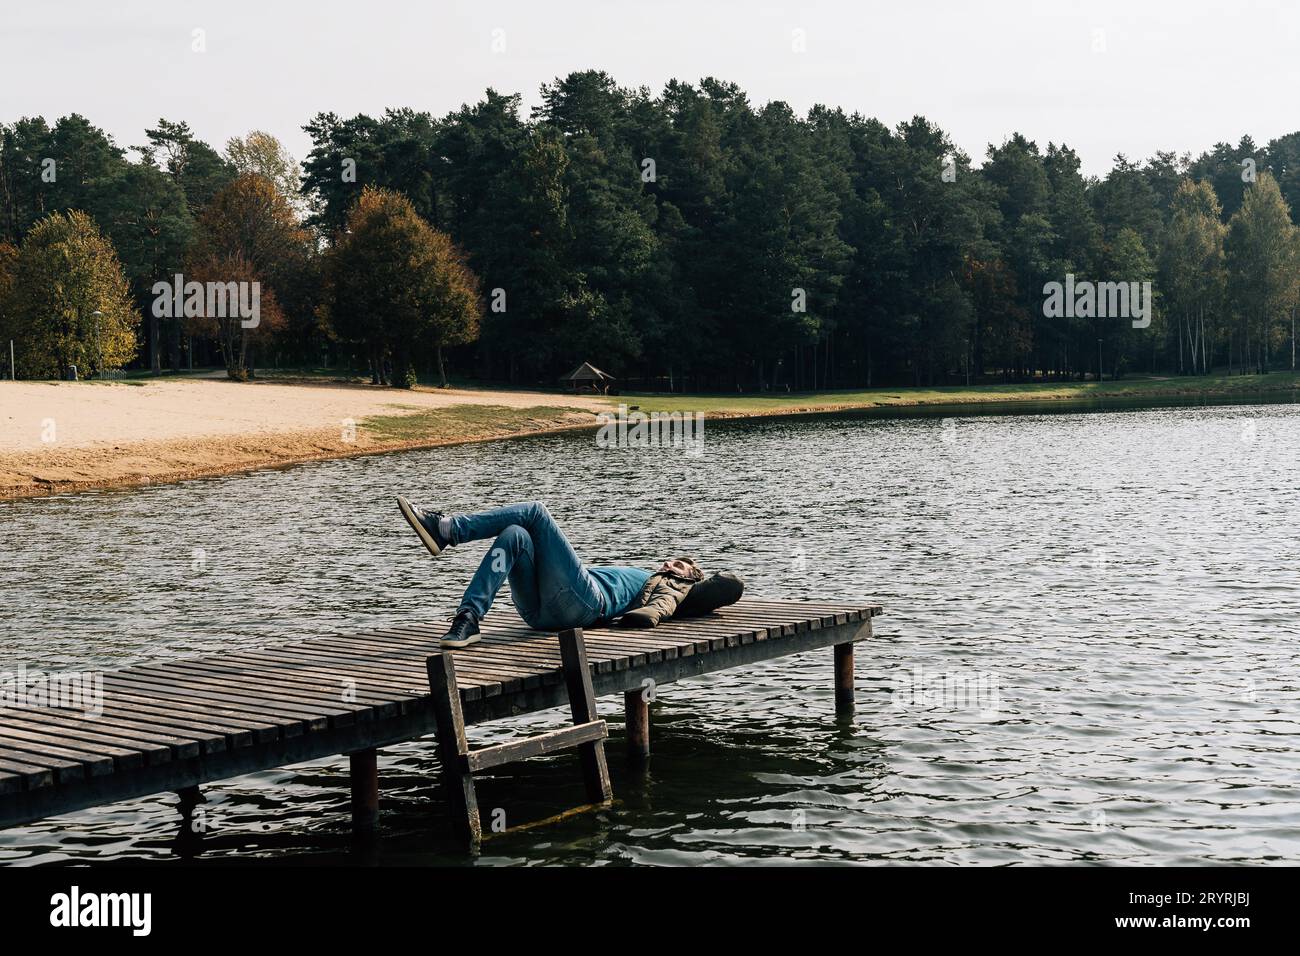 A man rests lying on a wooden pier on a lake in jeans and a jacket on an autumn day Stock Photo